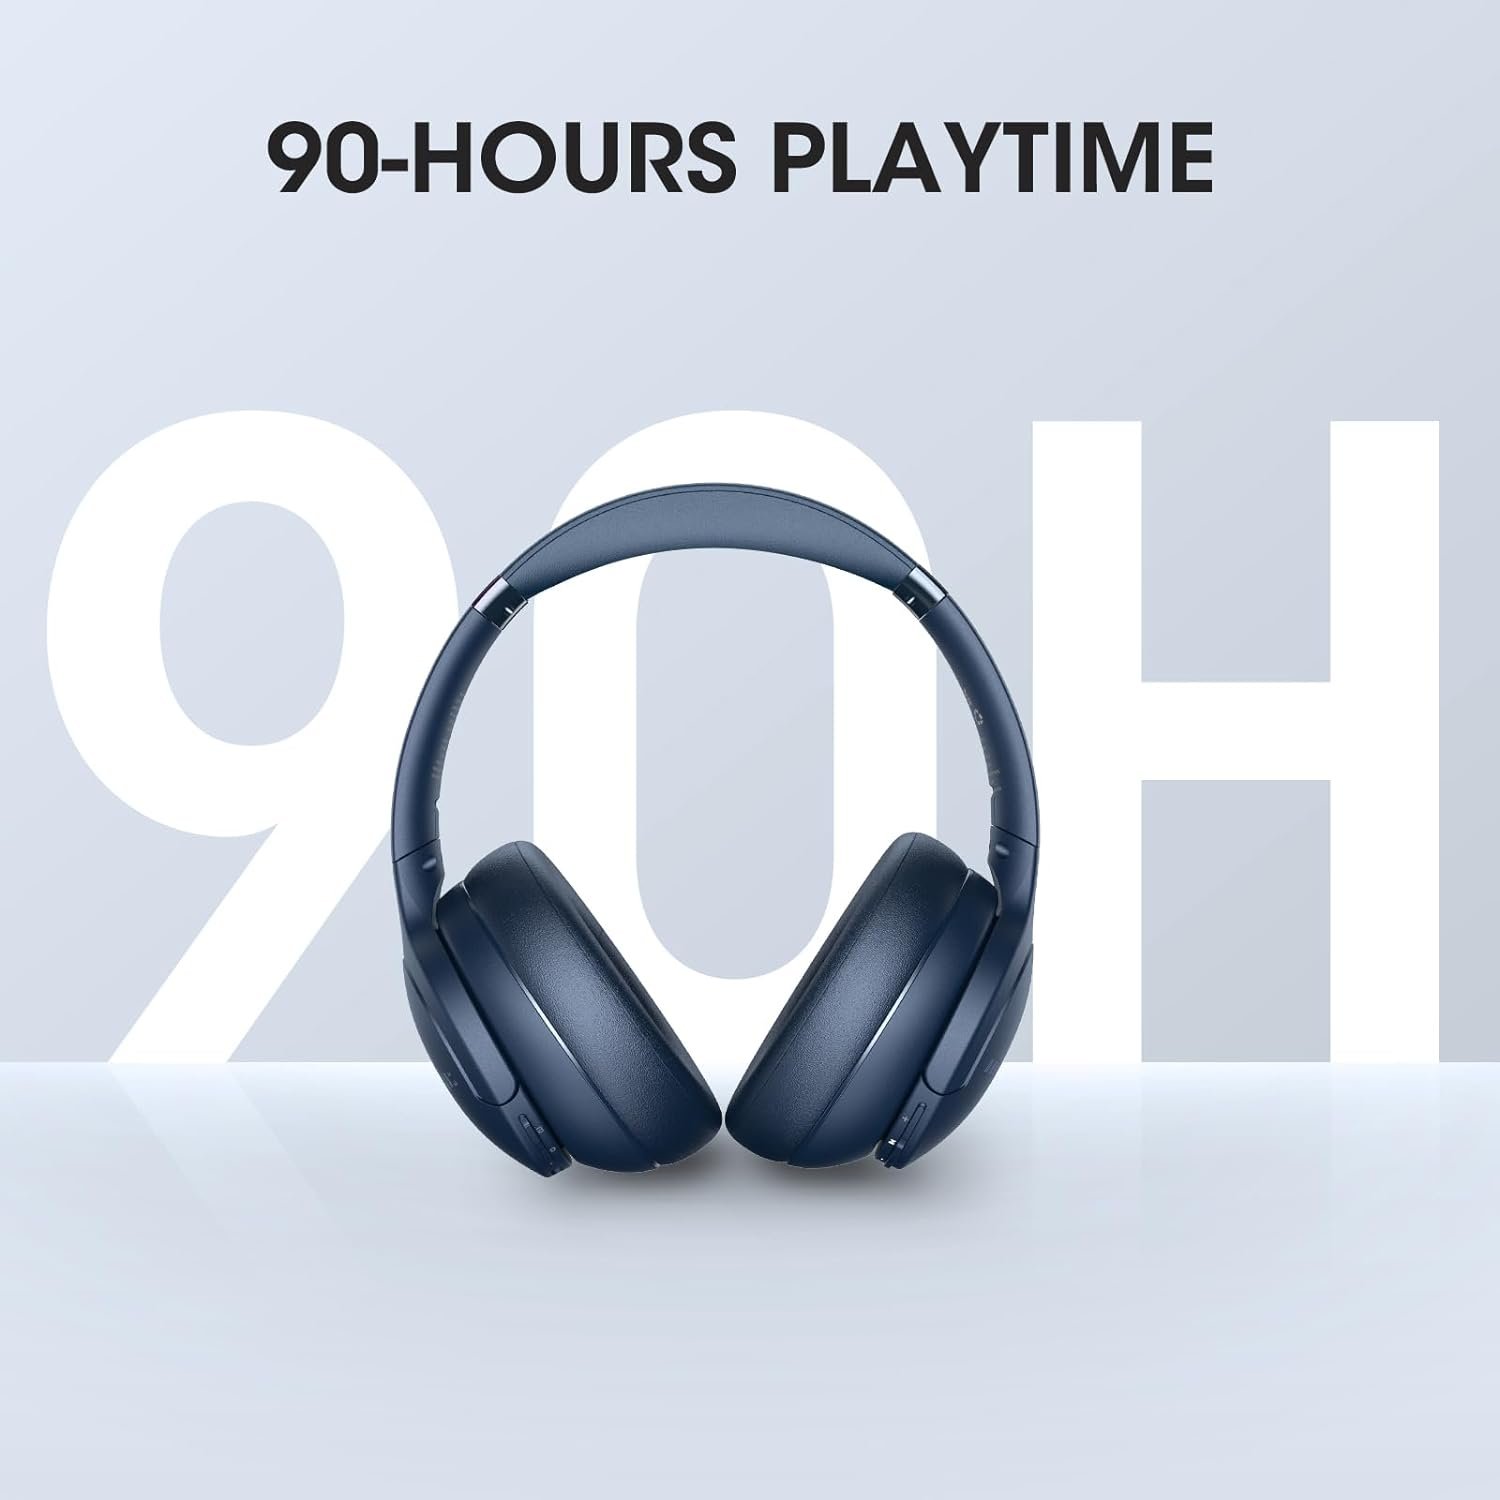 DOQAUS Up to 90 Hours of Playtime